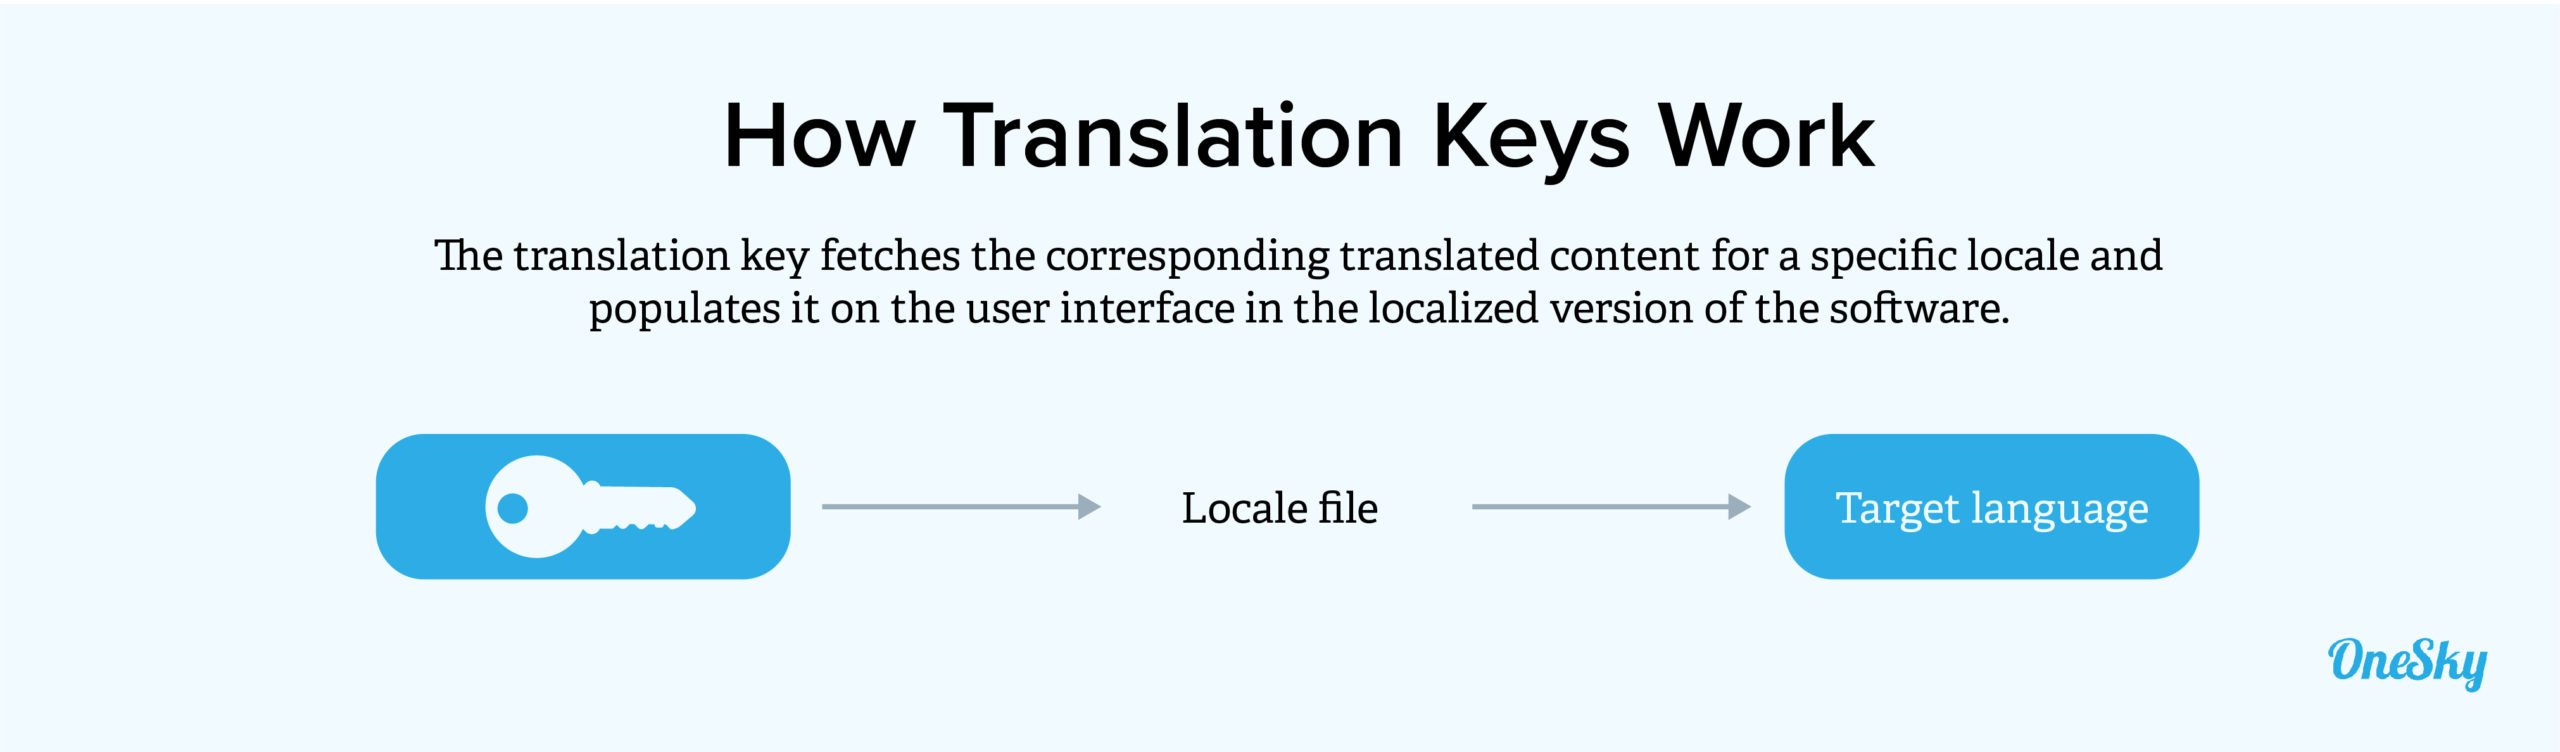 What Are Translation Keys and How Do They Work